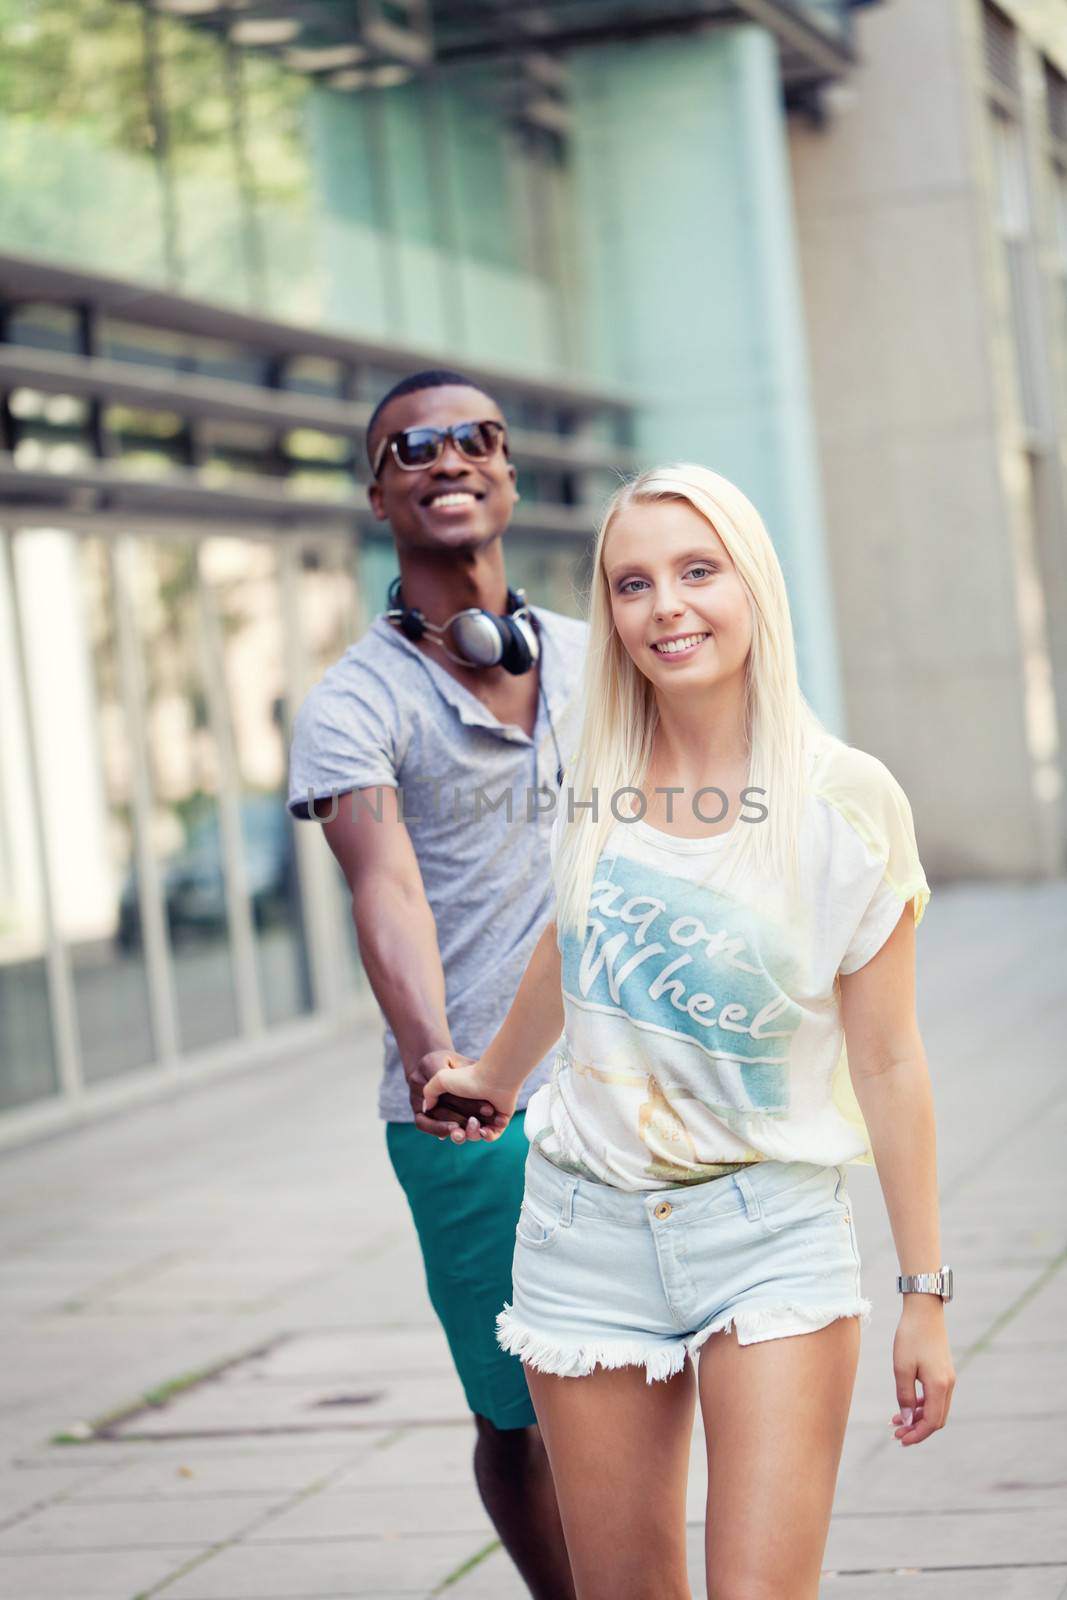 happy young couple have fun in the city summertime outdoor smiling lifestyle